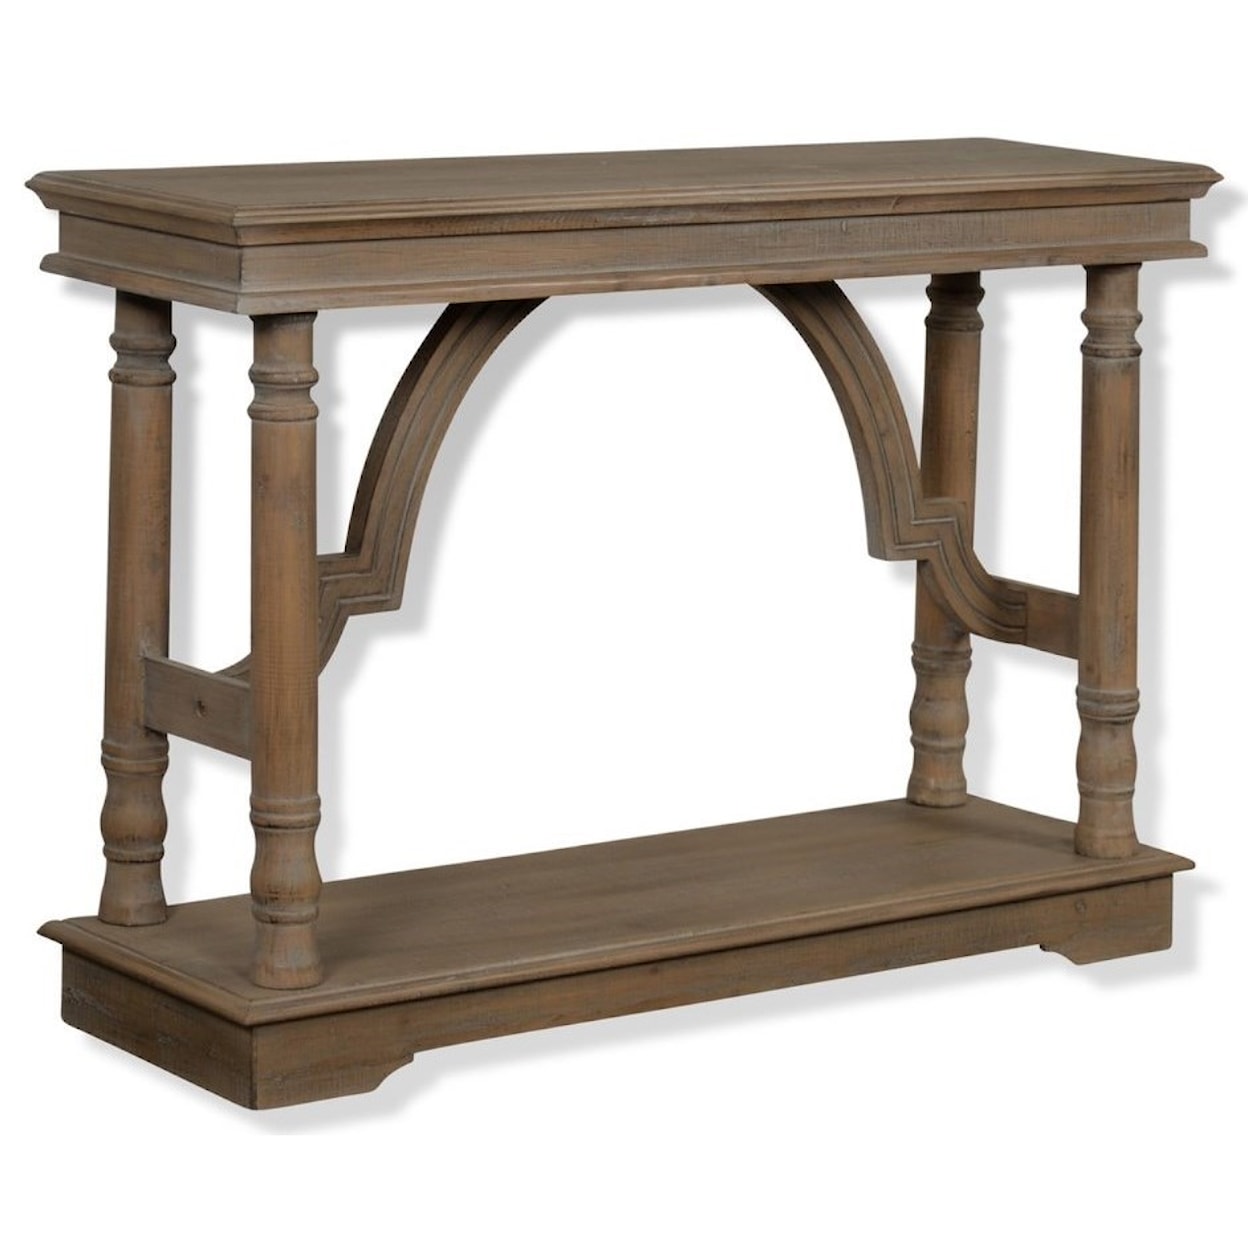 StyleCraft Occasional Tables Weathered Wood Trestle Table